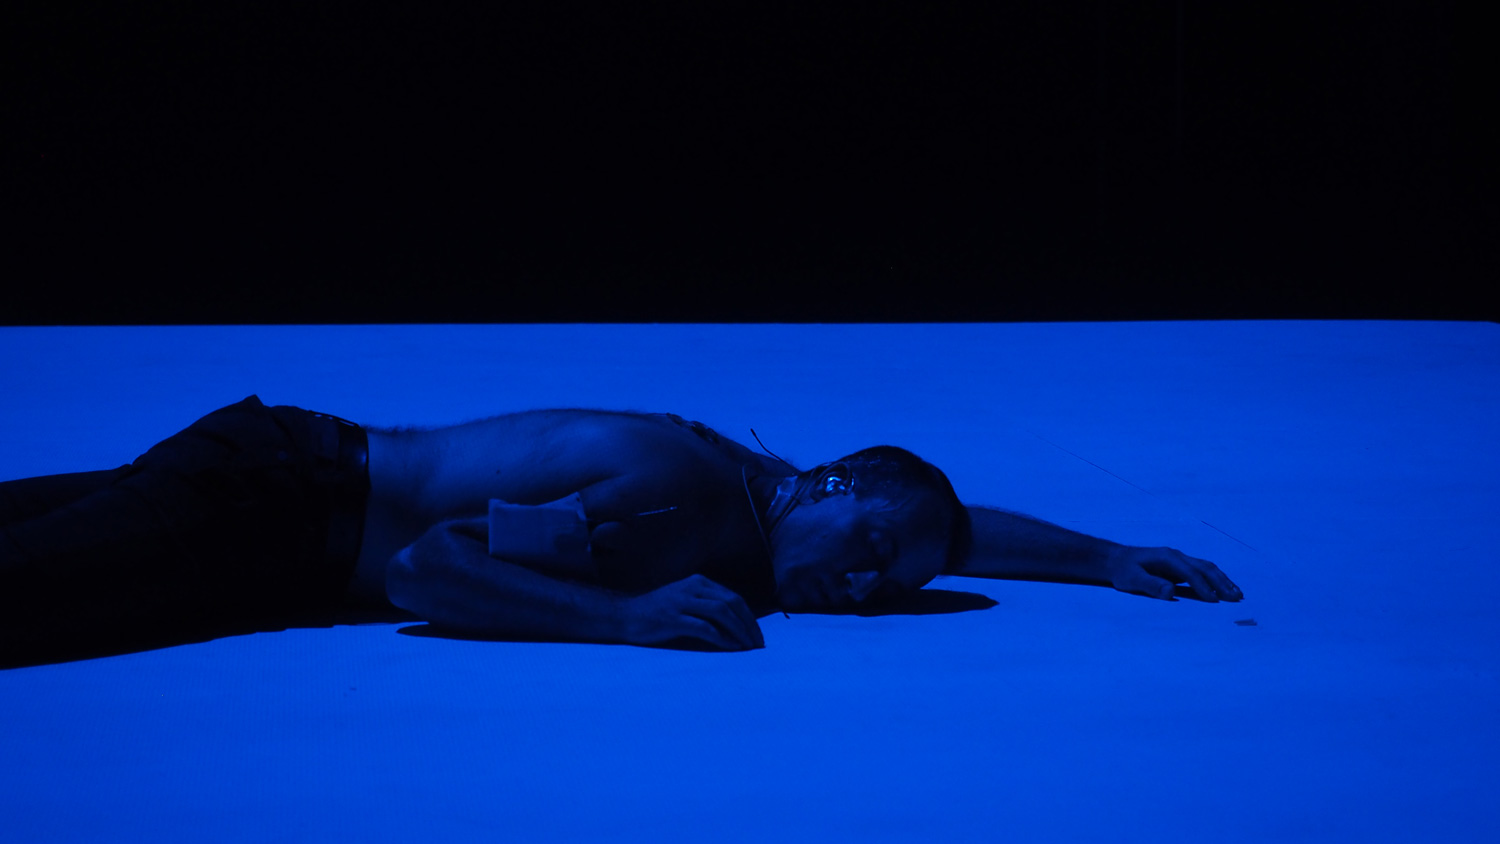 A male performer laying on stage washed in blue light. 